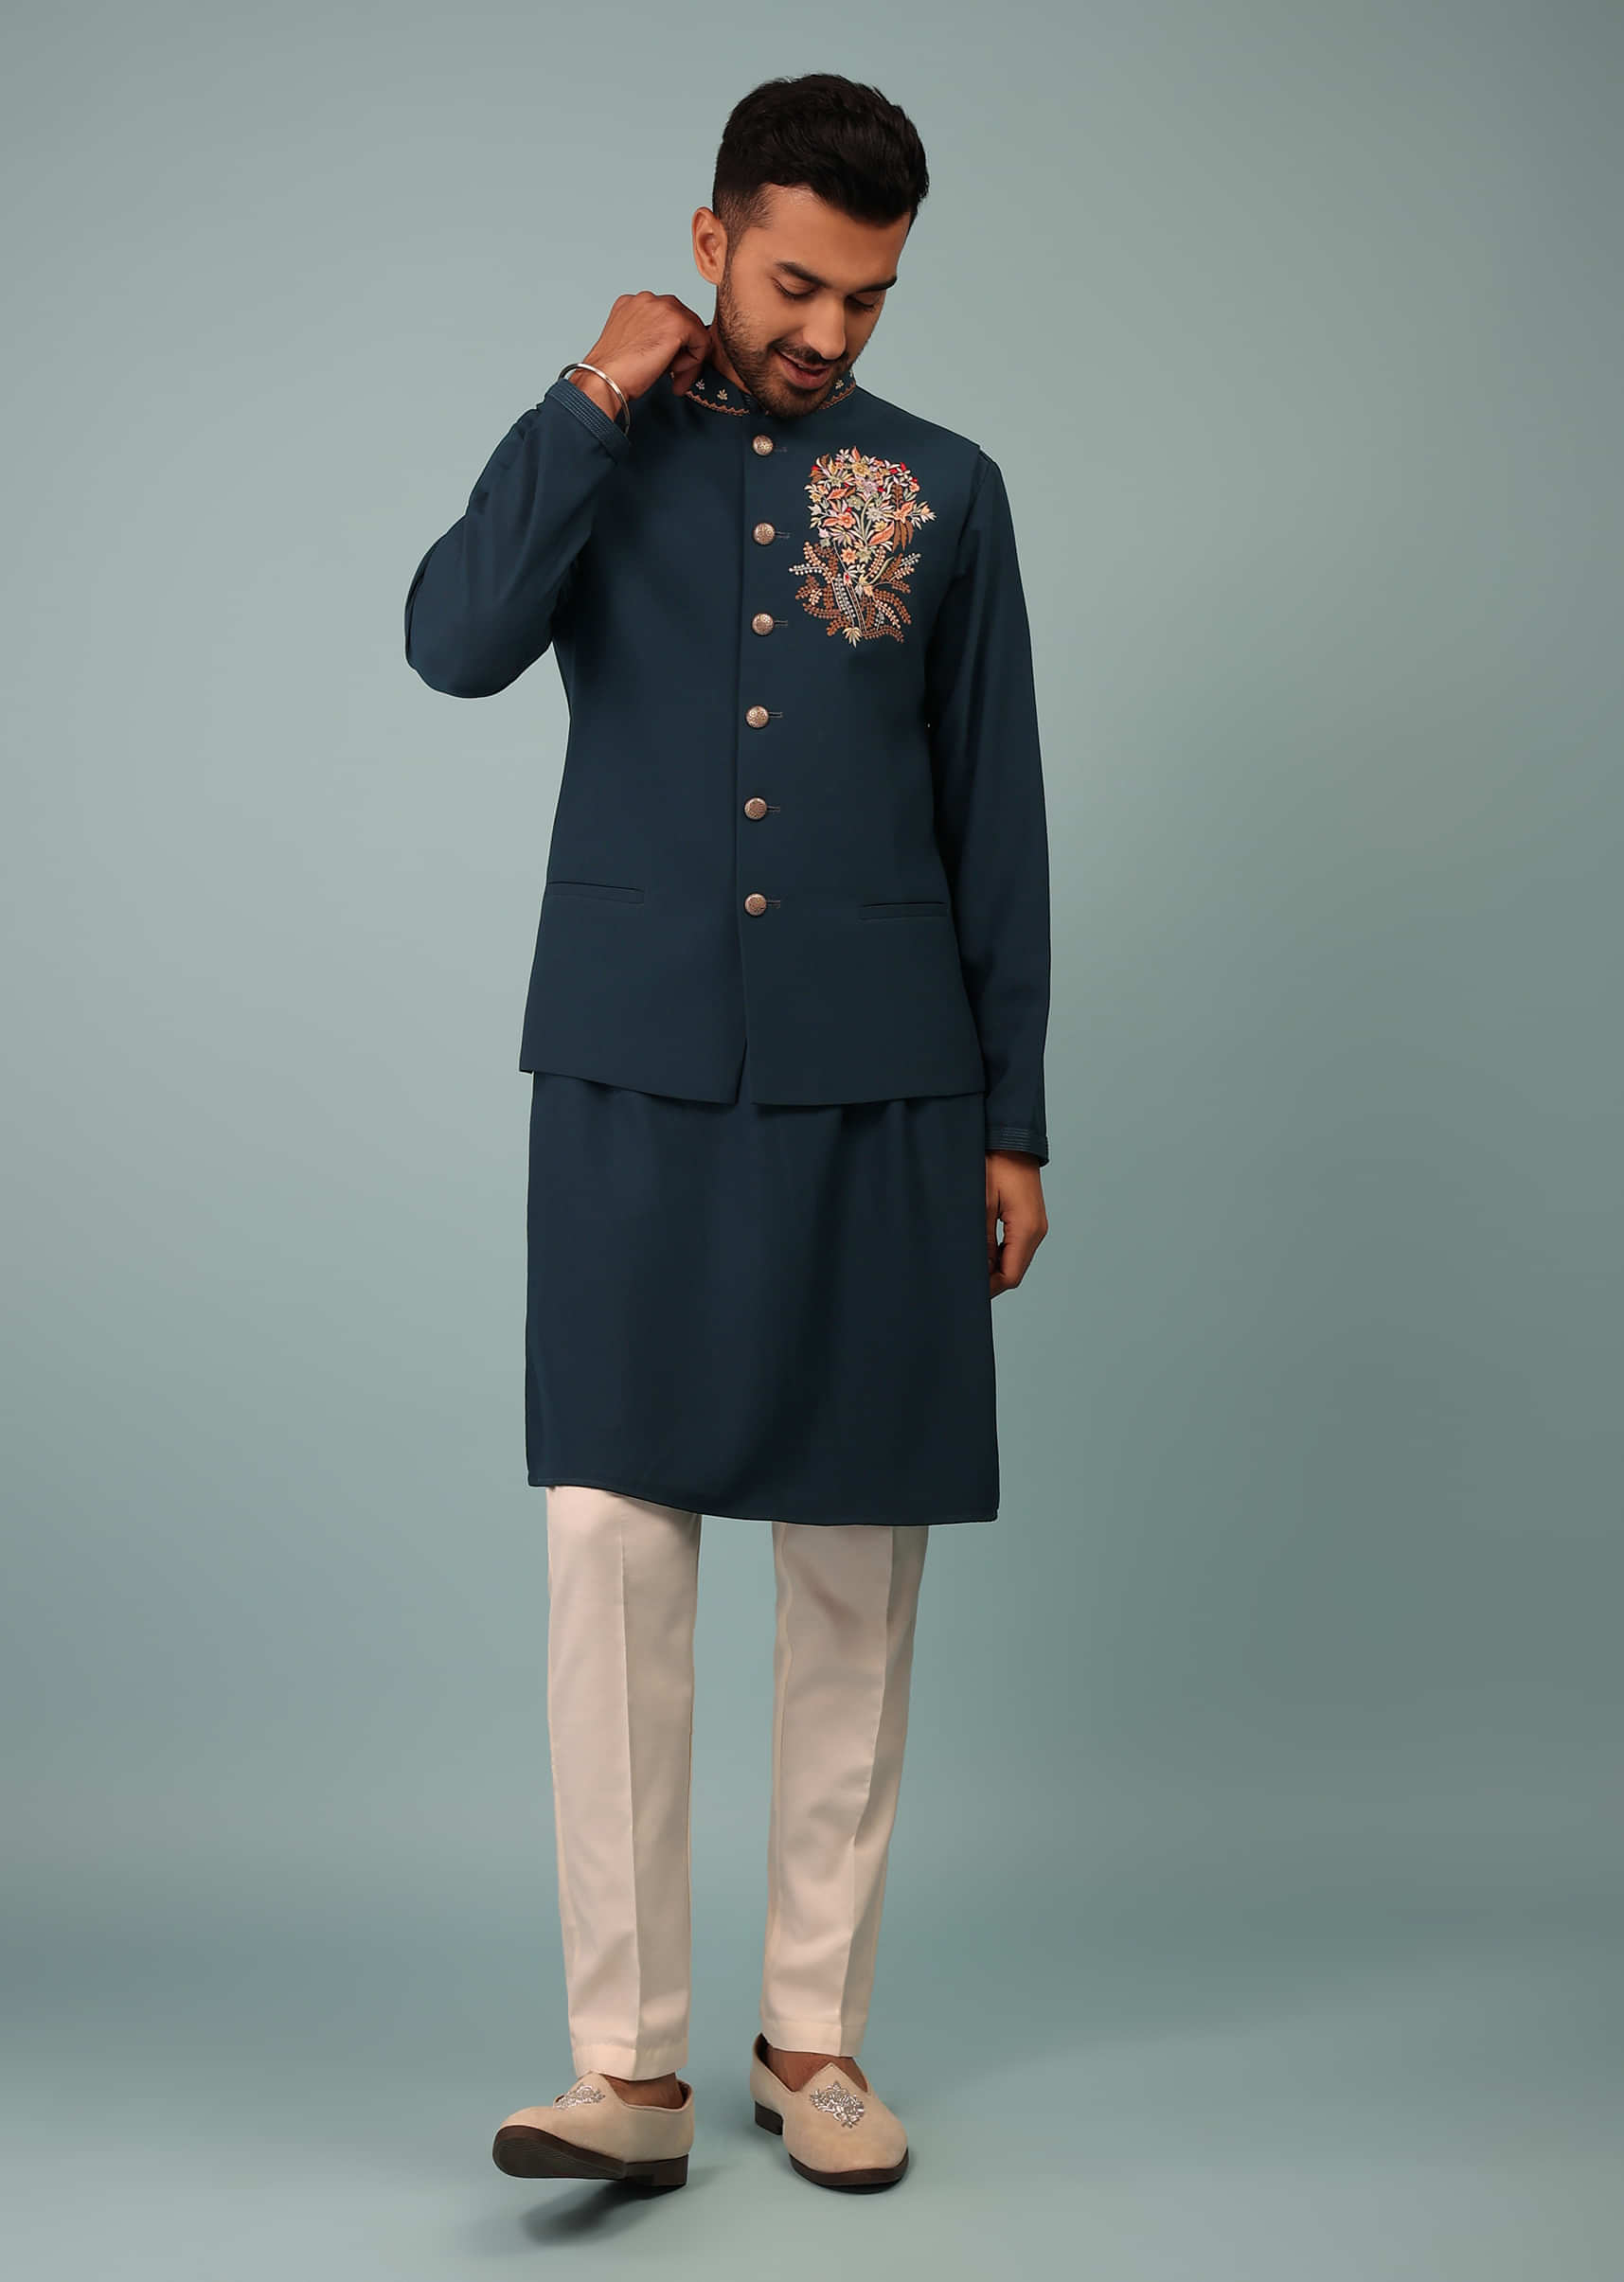 Teal Blue Bandi Jacket Set In Handloom Poly Wool With Multicolor Floral Butti Embroidery